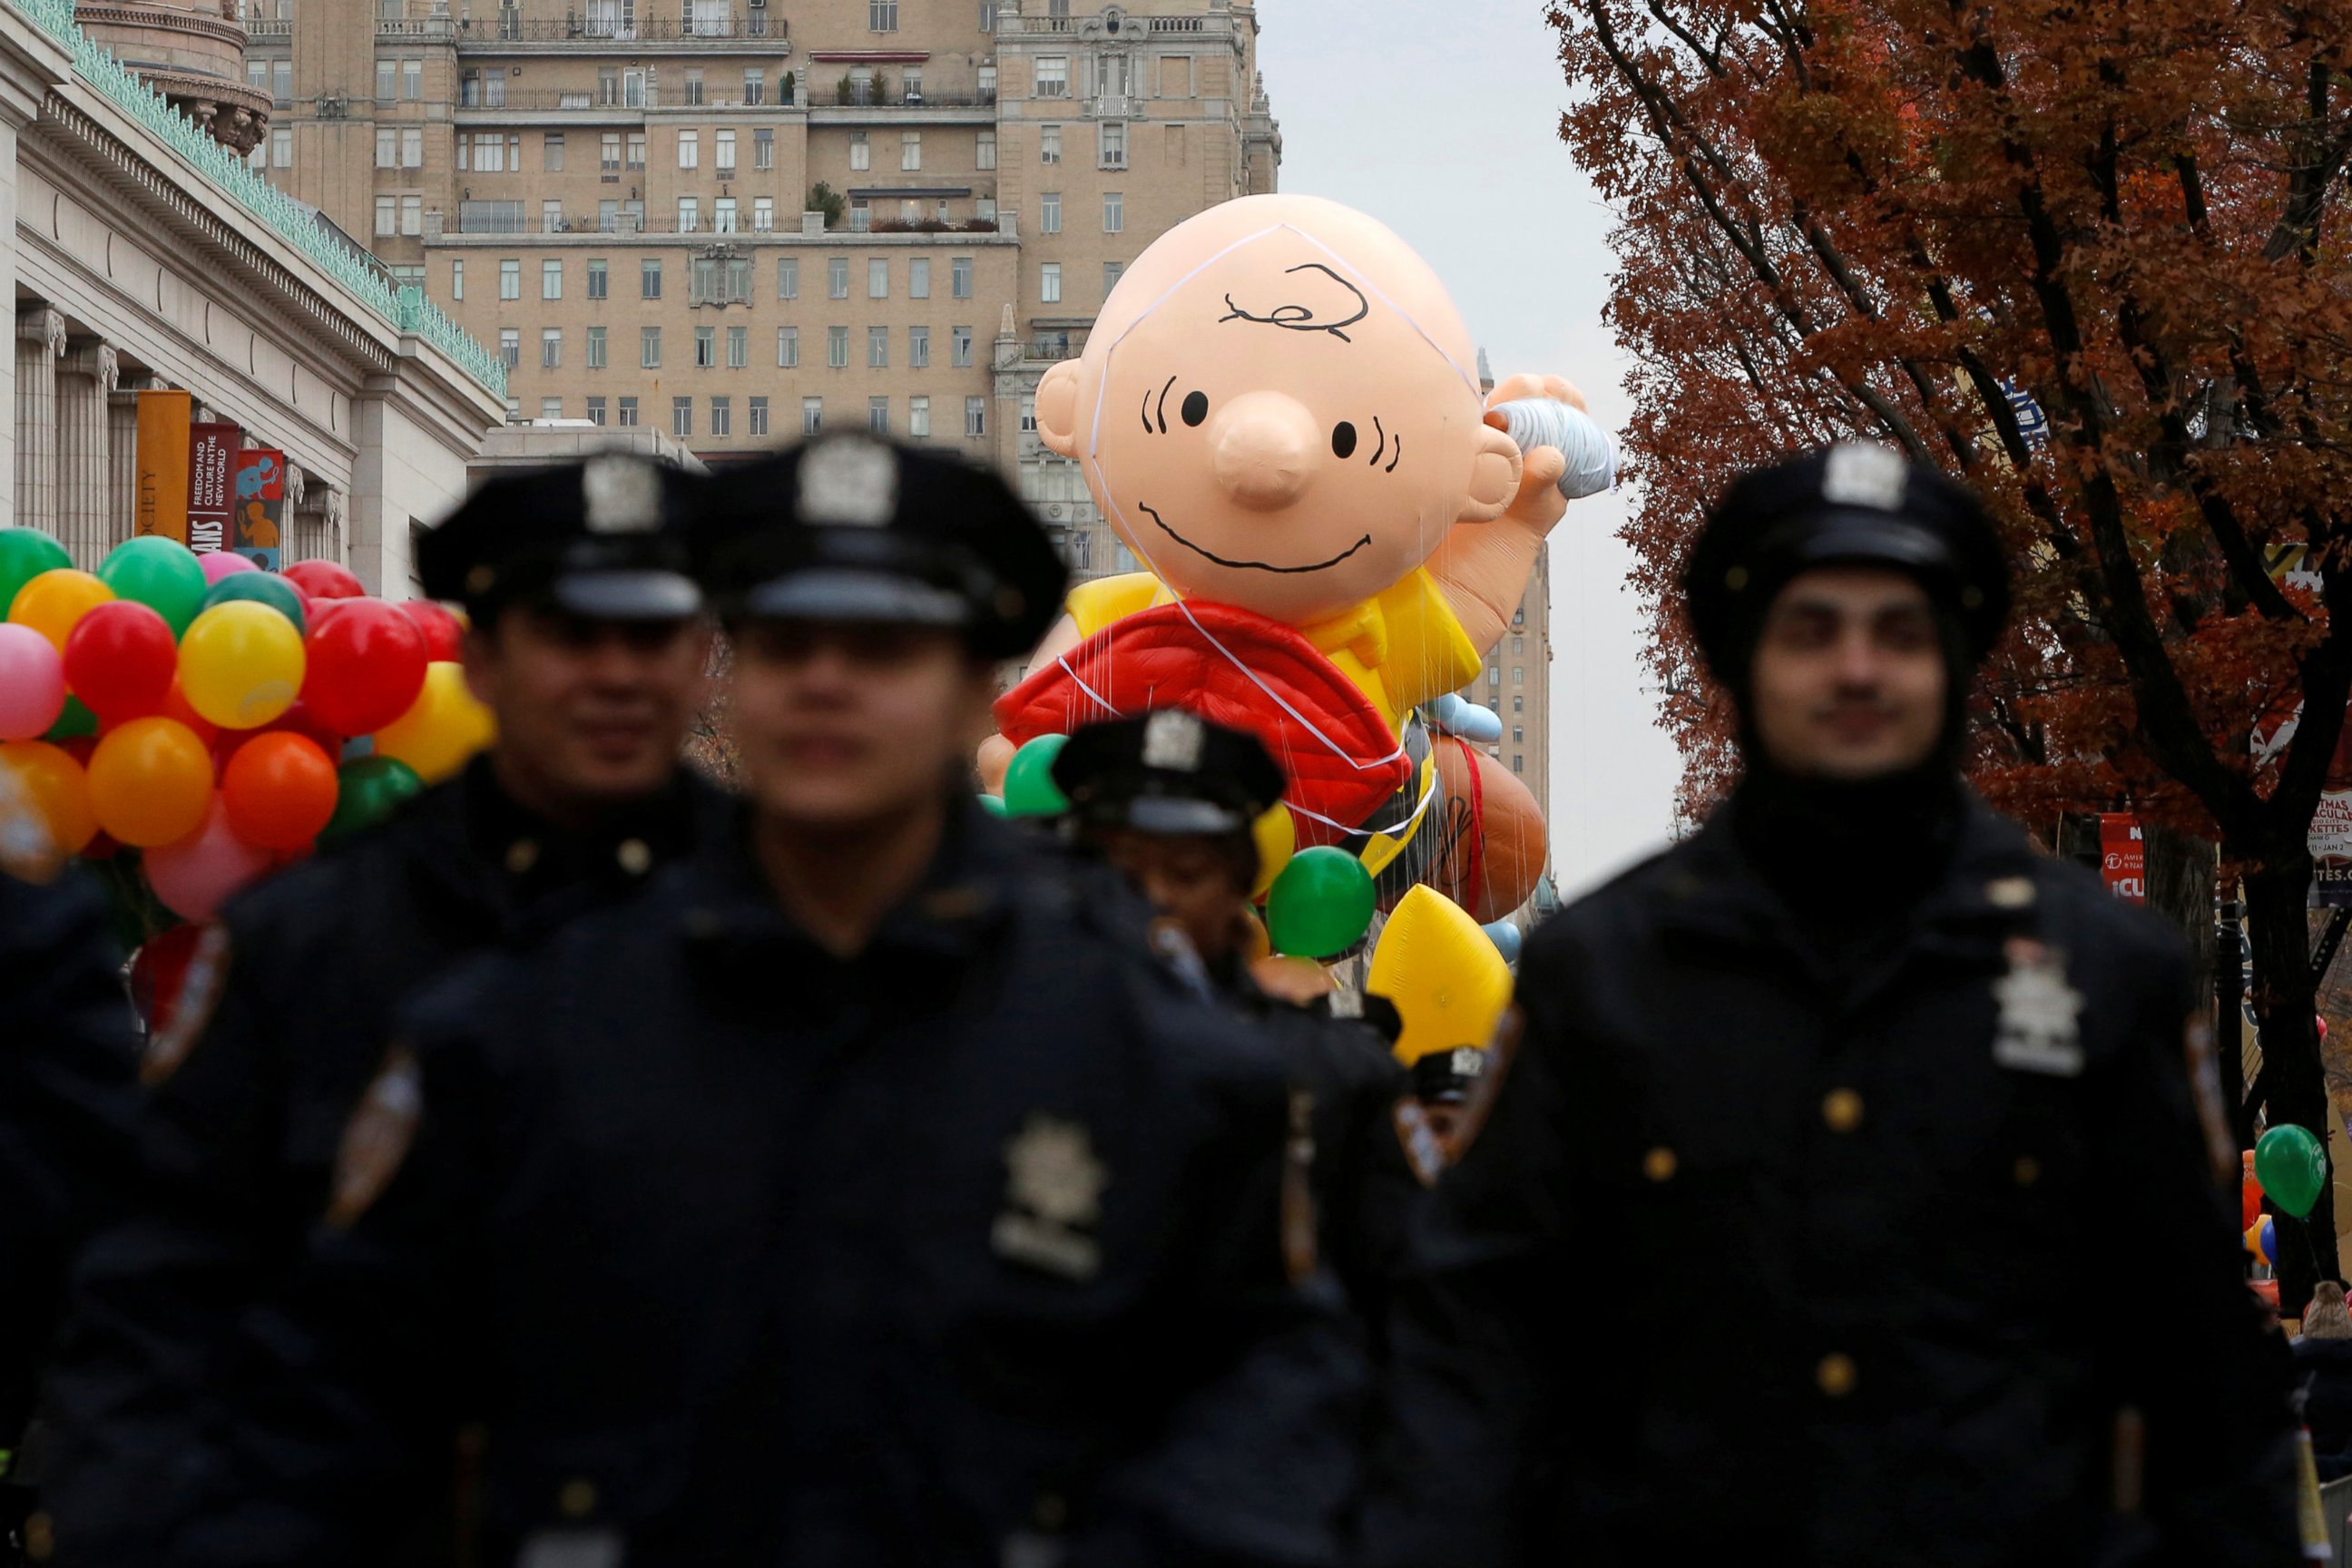 PHOTO: Members of the New York Police Department walk the parade route before the 90th Macy's Thanksgiving Day Parade in Manhattan, New York, Nov. 24, 2016.  